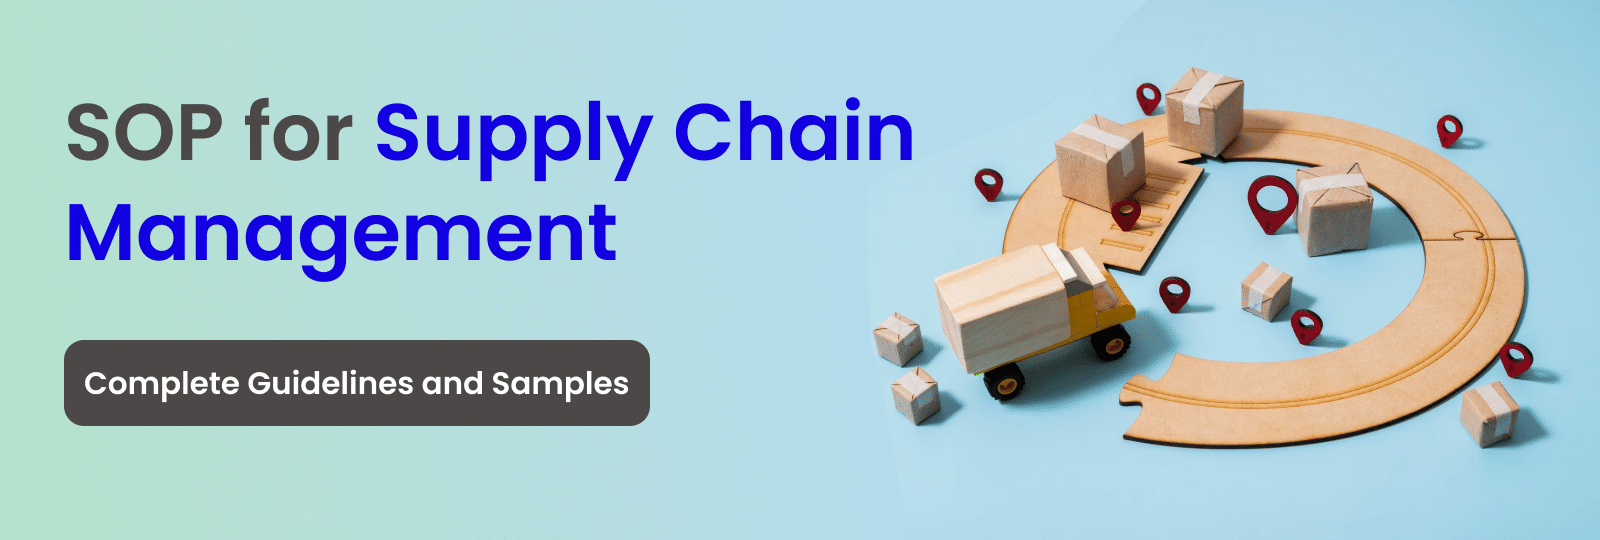 SOP for Supply Chain Management: Complete Guidelines and Samples